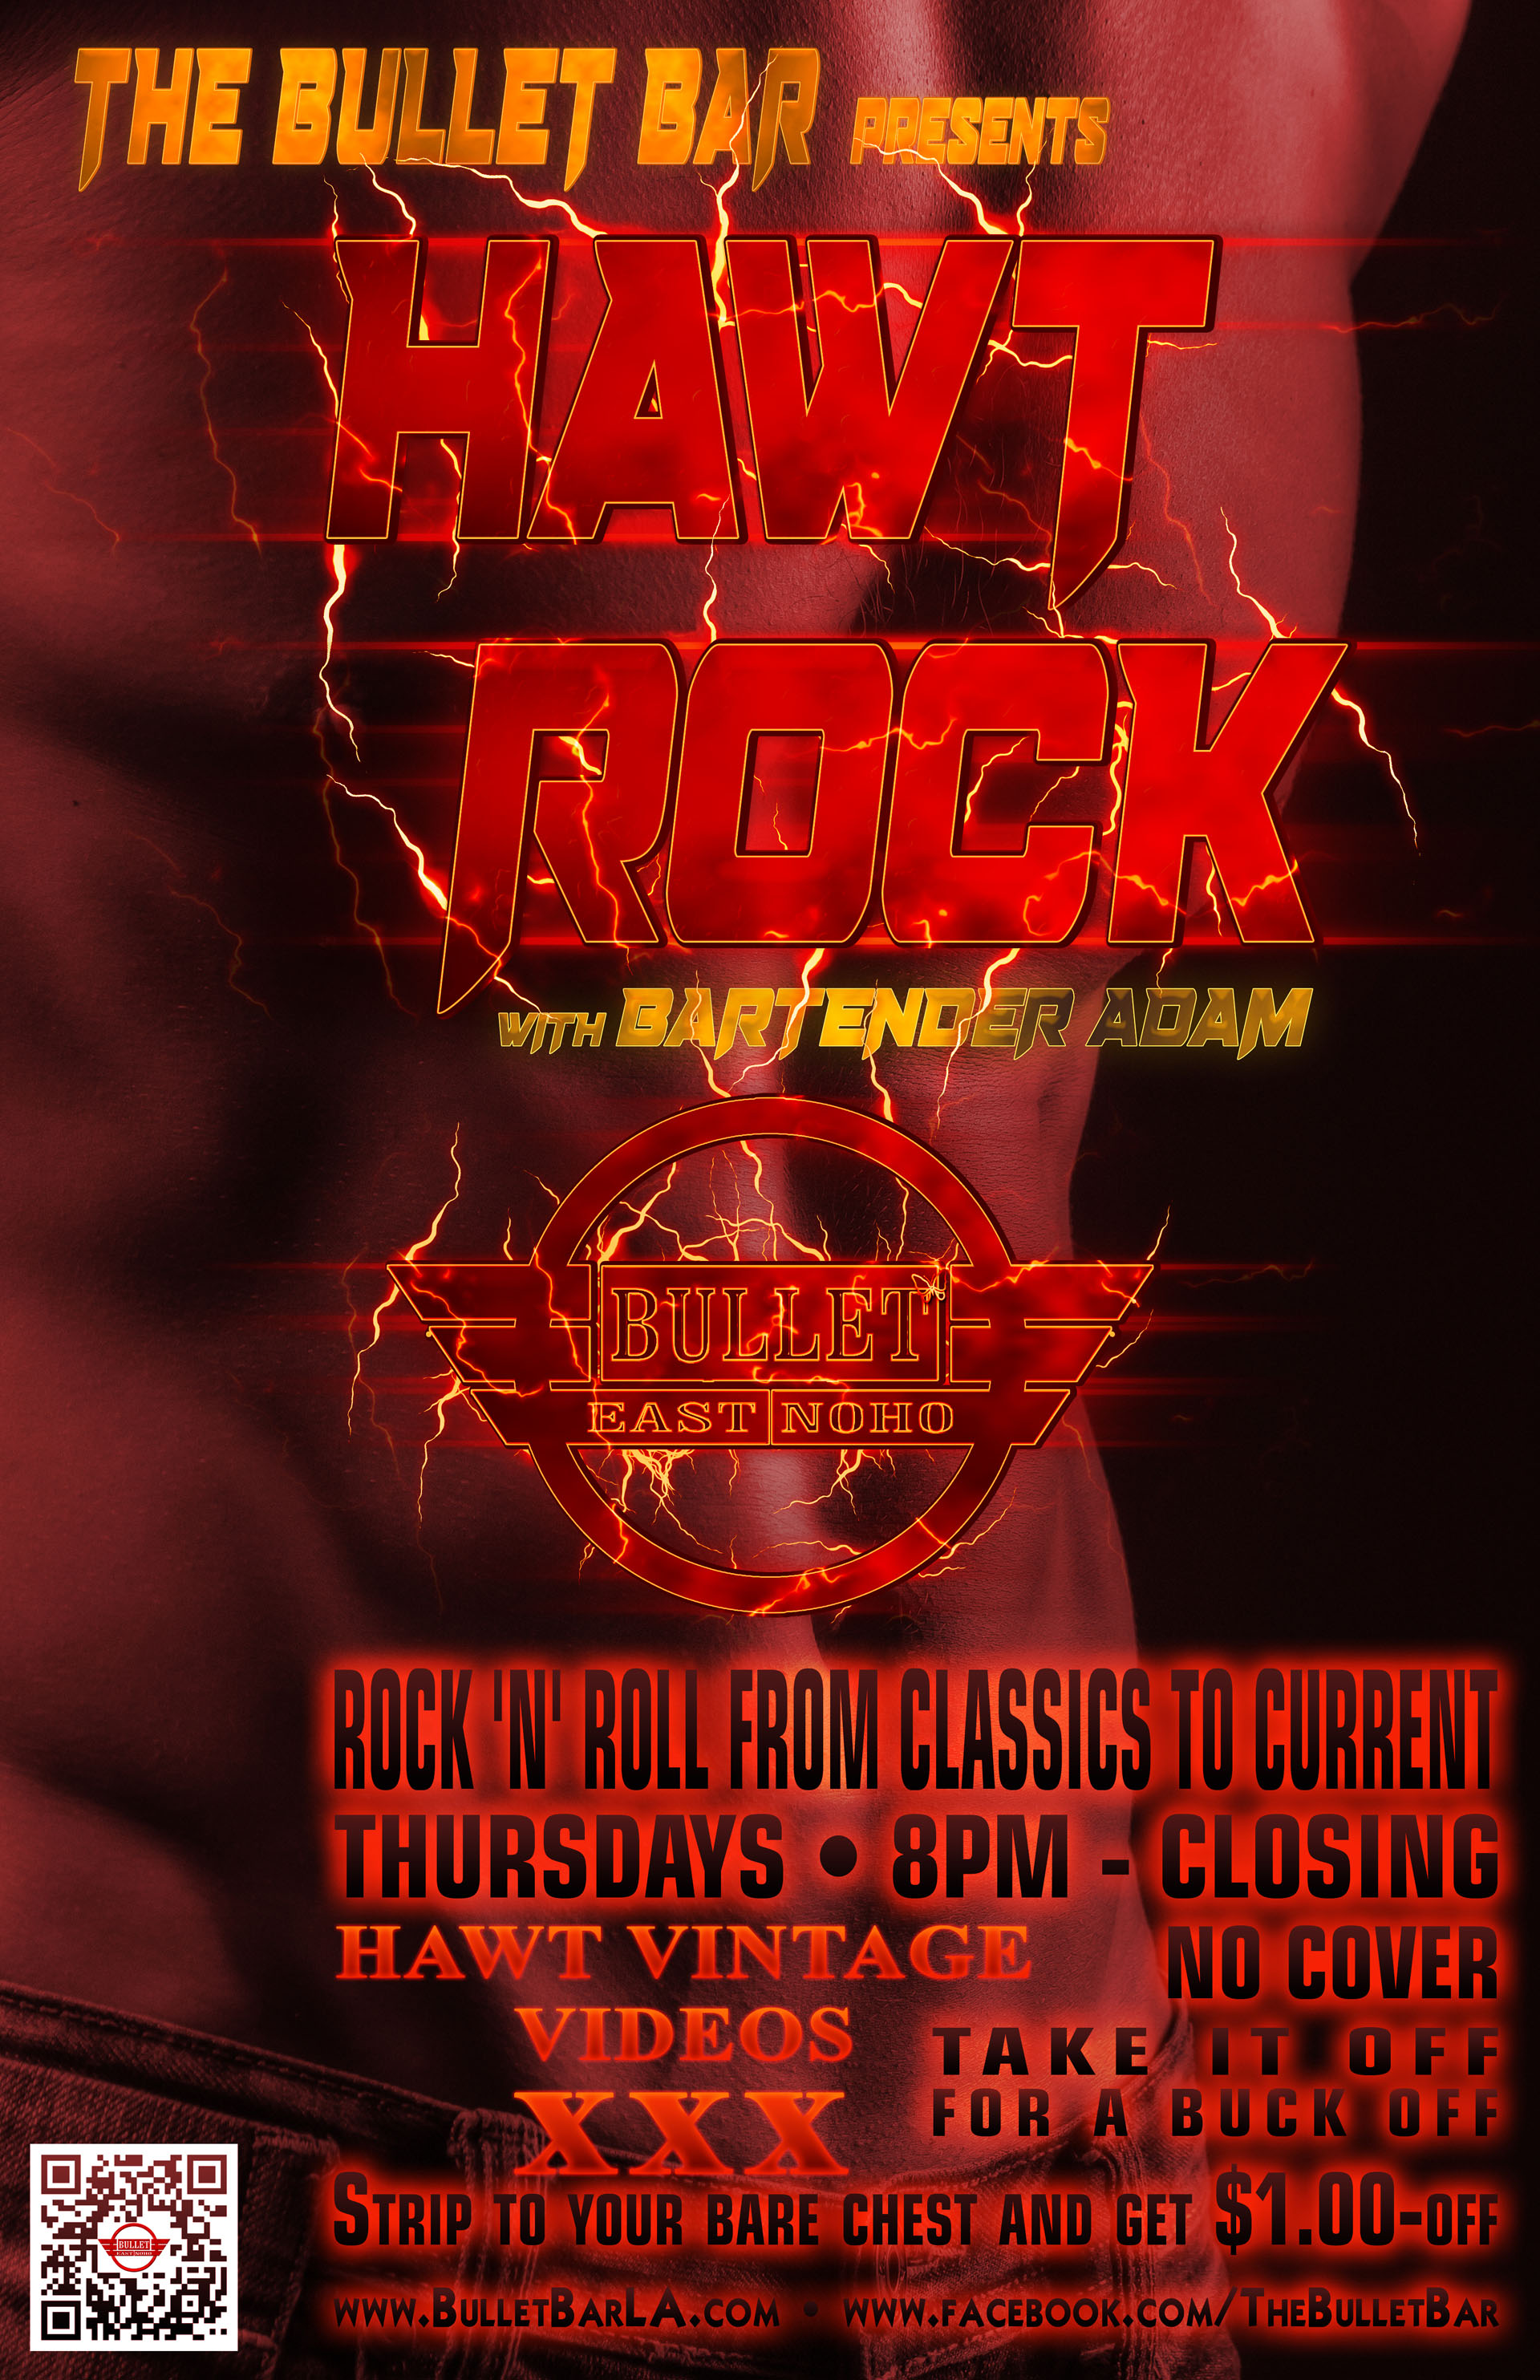 The Bullet Bar Presents HAWT ROCK: Thursday Nights from 8:00 PM to Closing with Bartender Adam! Take your shirt off and get a $ off up to call! No cover.